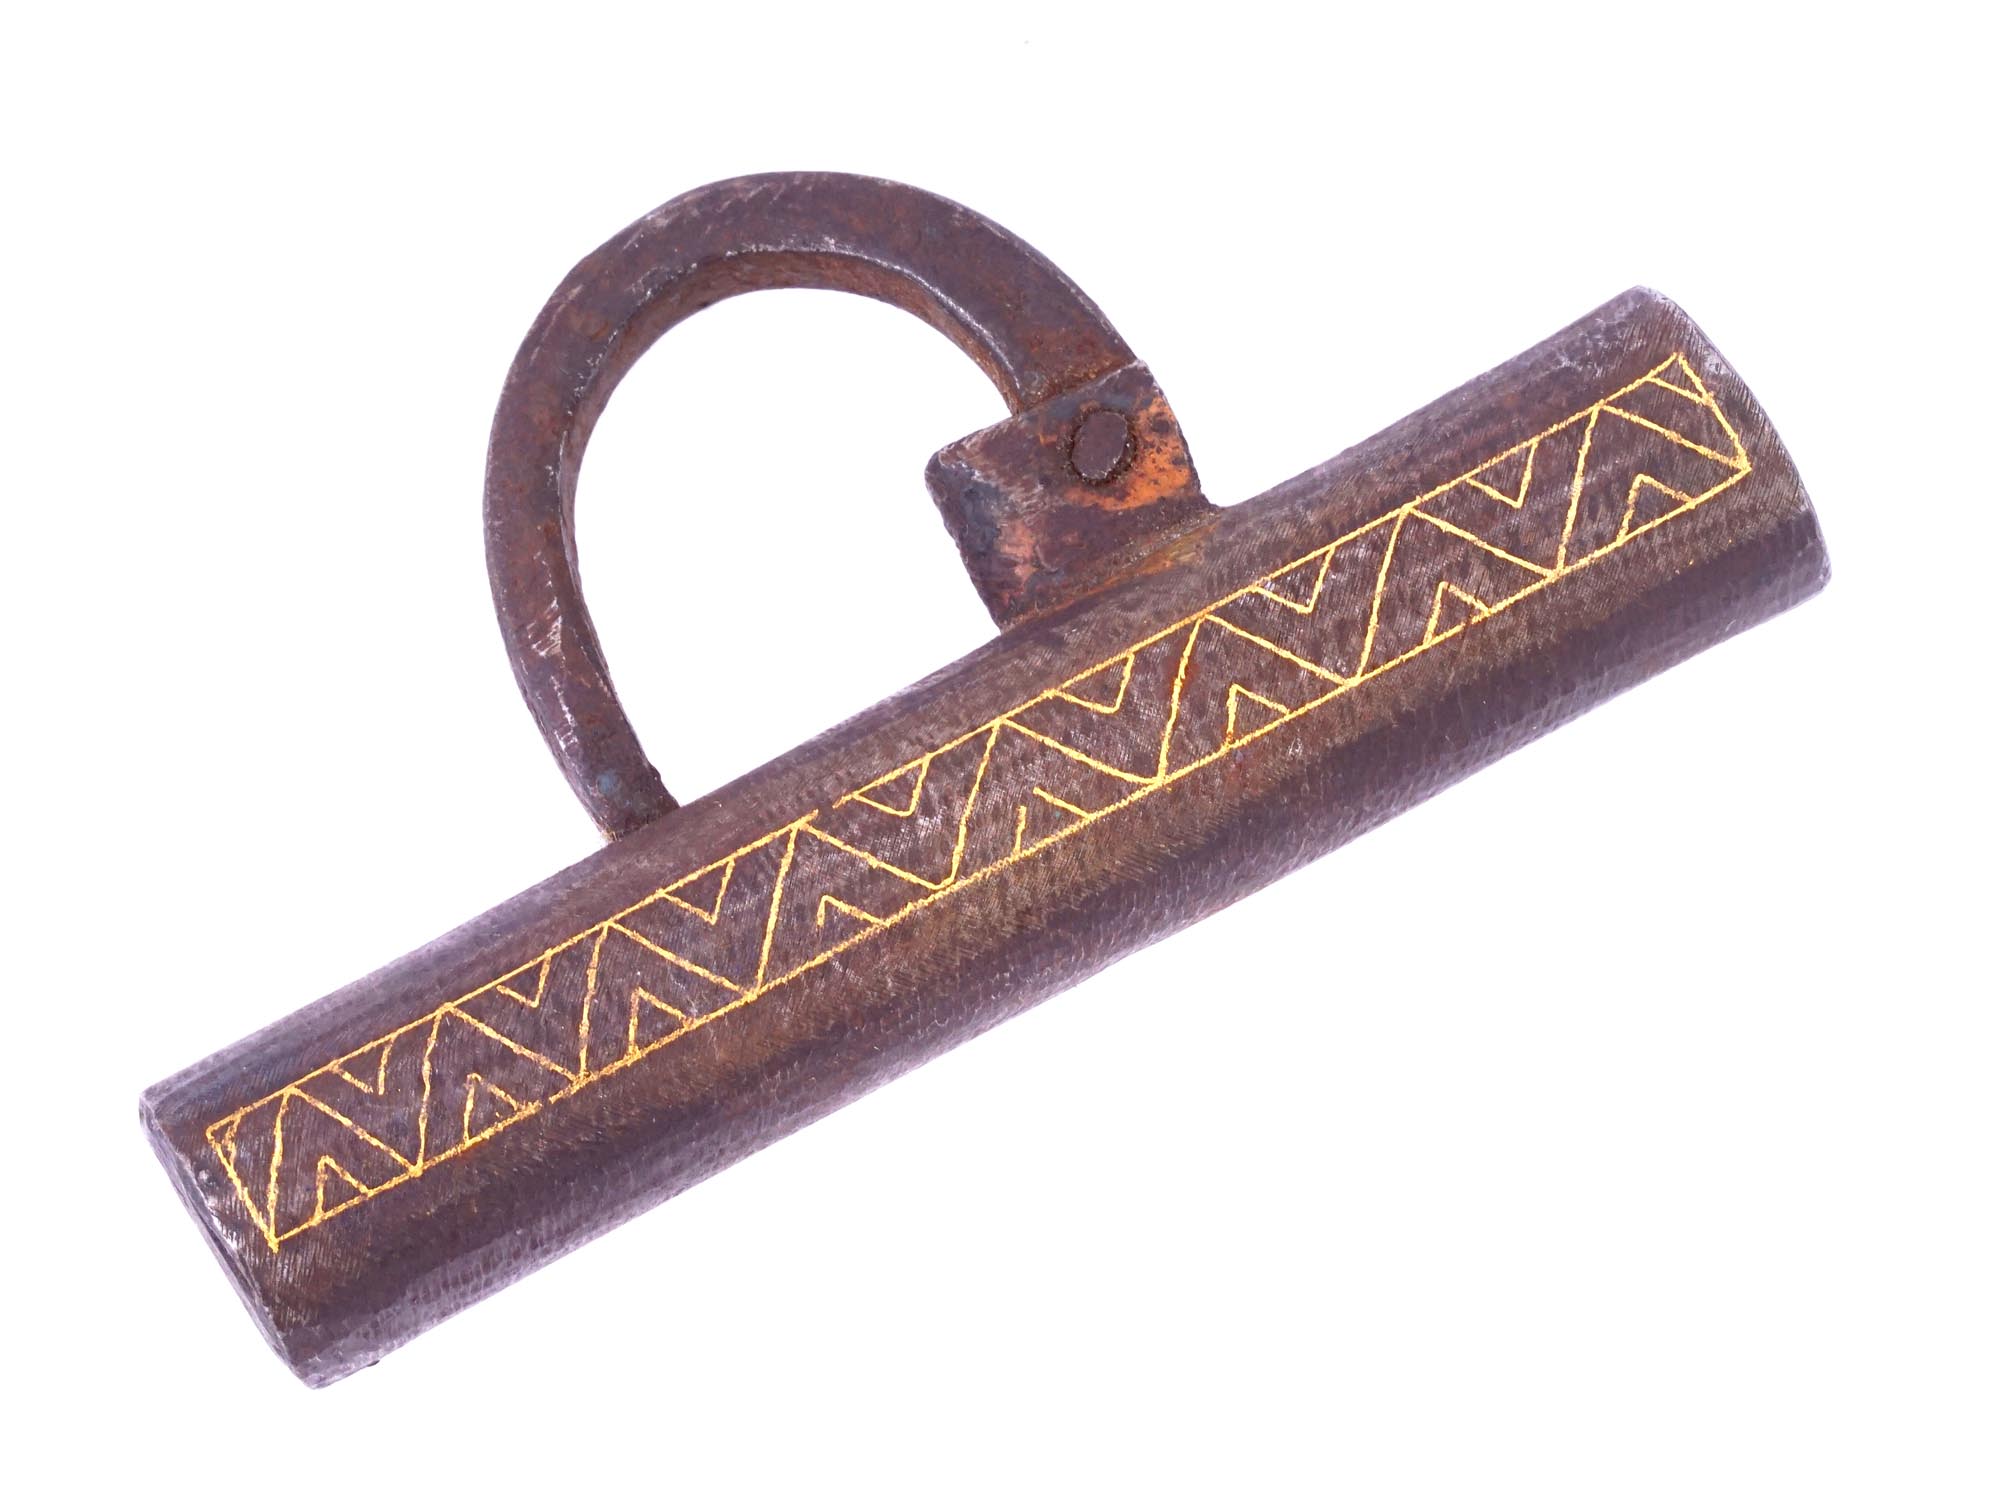 ANTIQUE ISLAMIC PADLOCK WITH GEOMETRICAL PATTERNS PIC-0